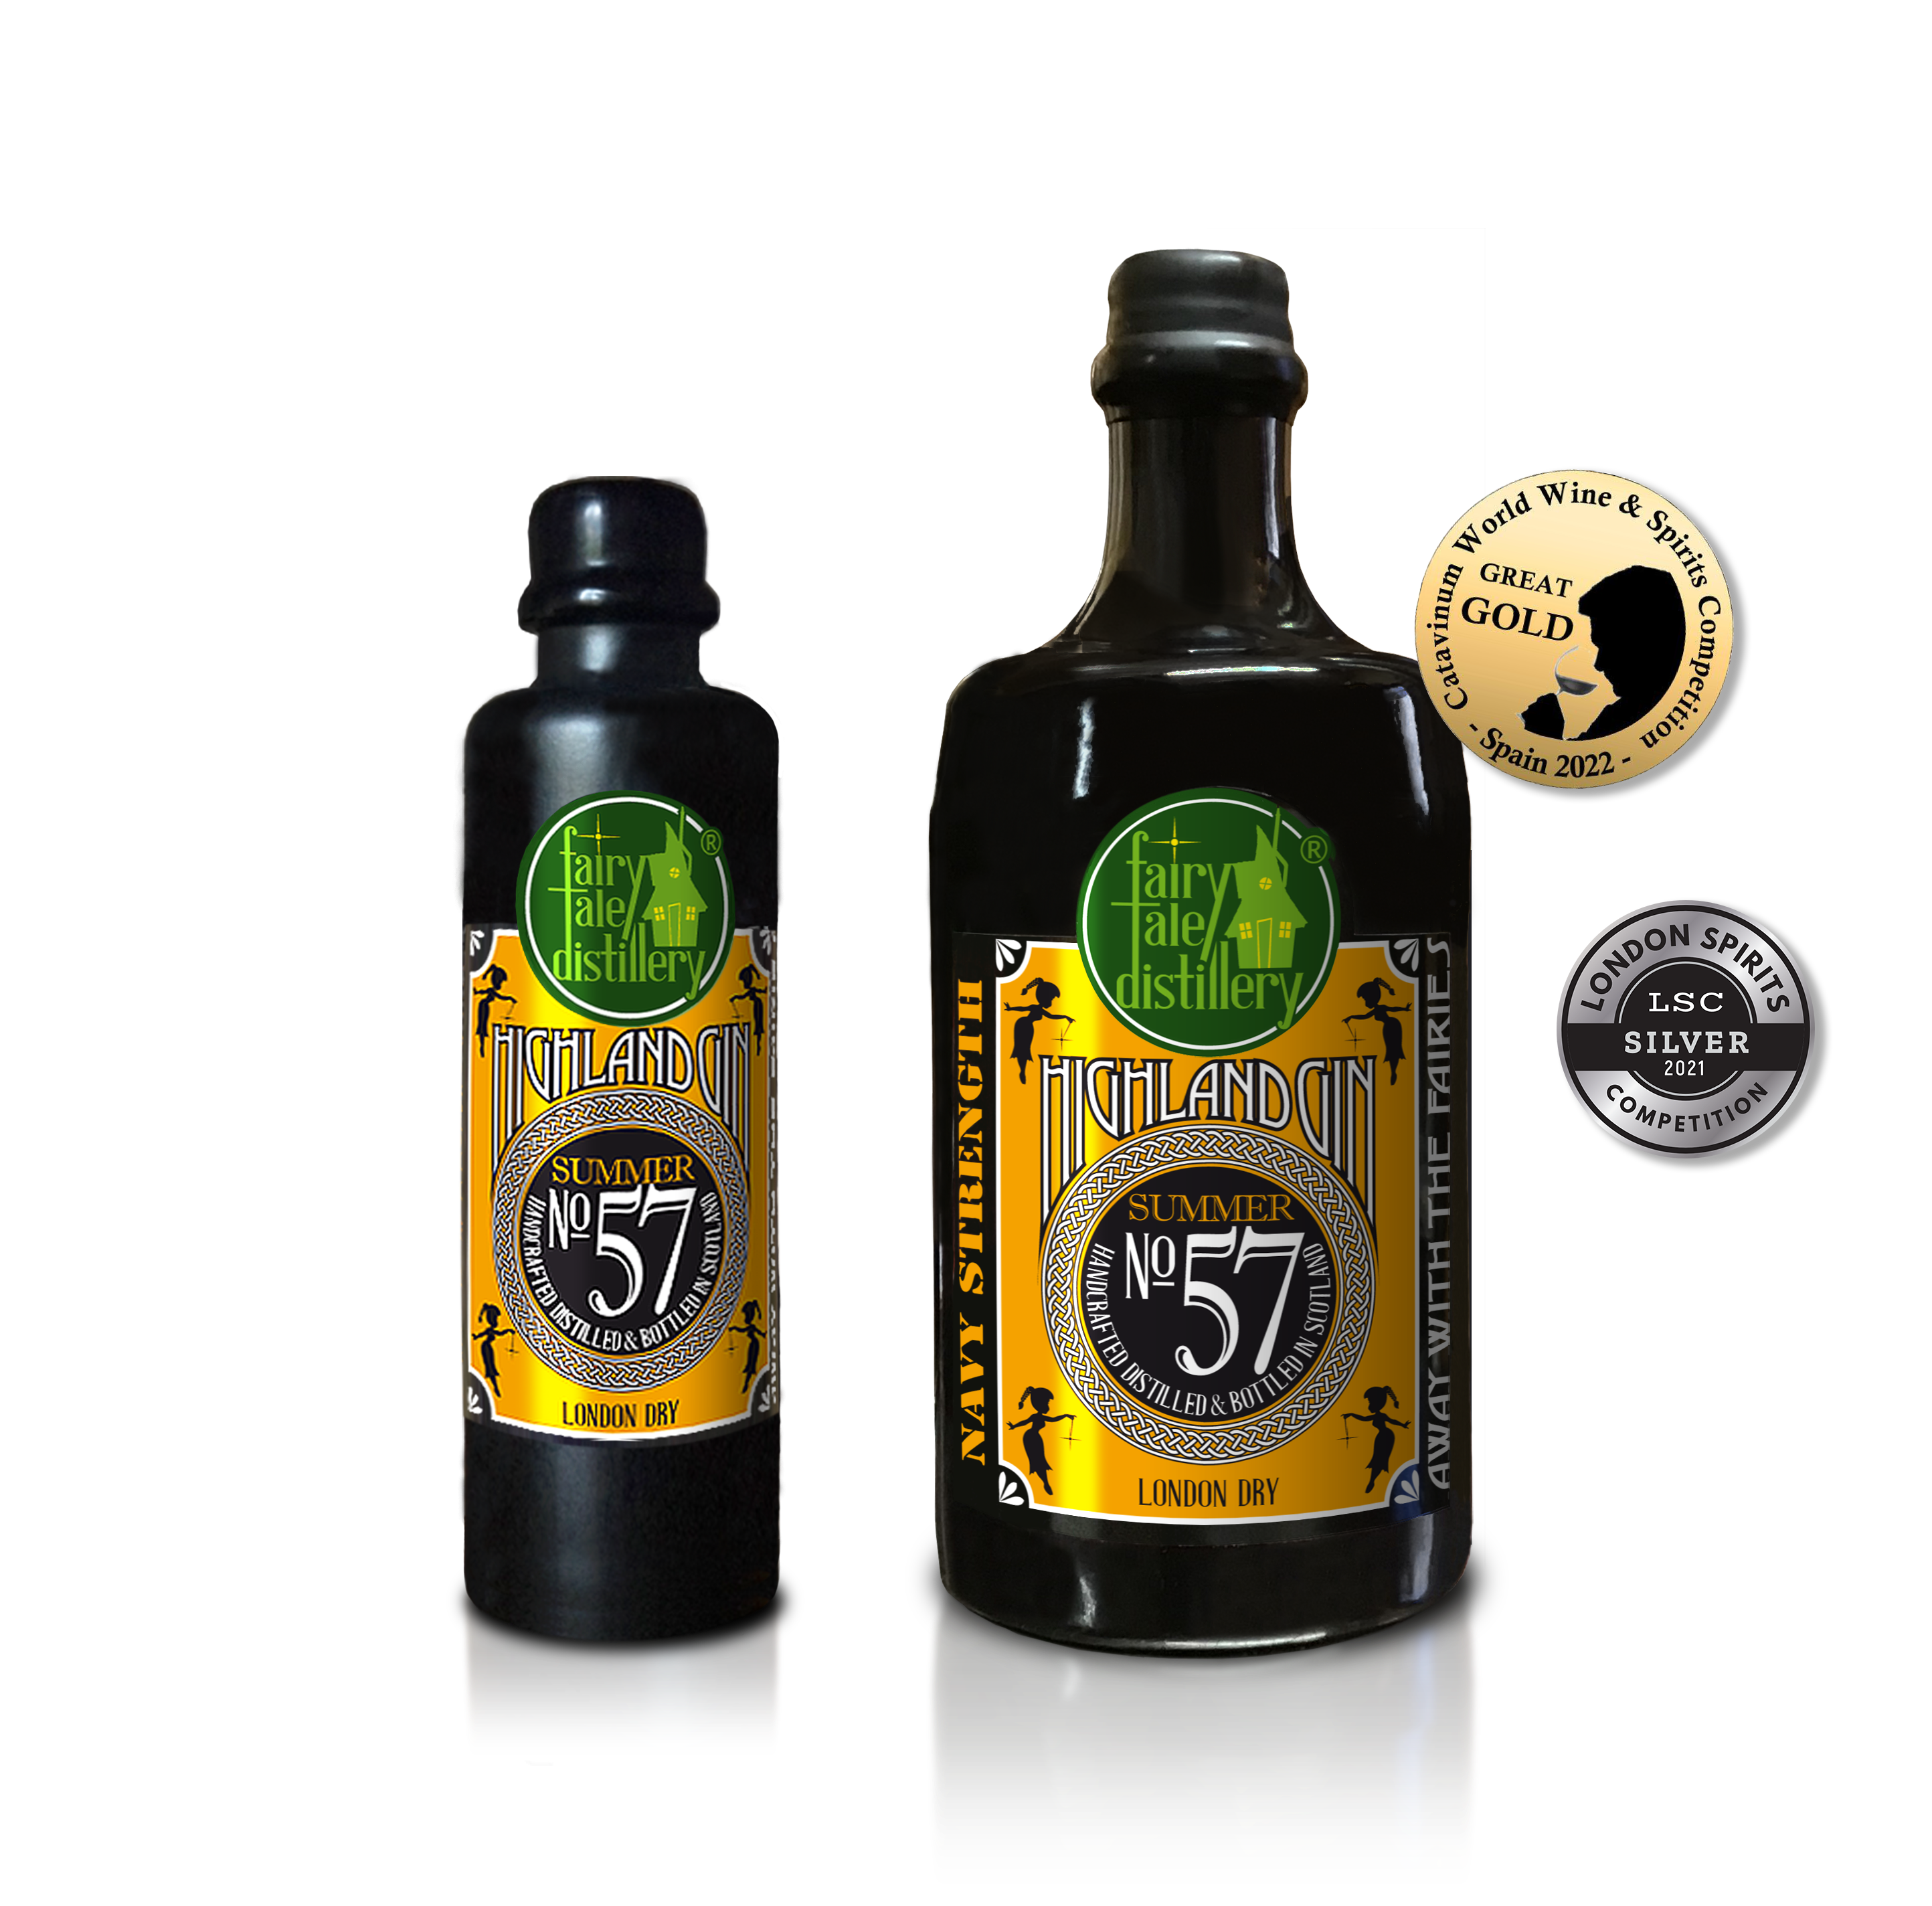 No 57 London Dry Summer Highland Gin bottle from Fairytale Distillery with Catavinum World Wine & Spirits Competition Spain 2022 Great Gold - London Spirits Competition 2021 Silver